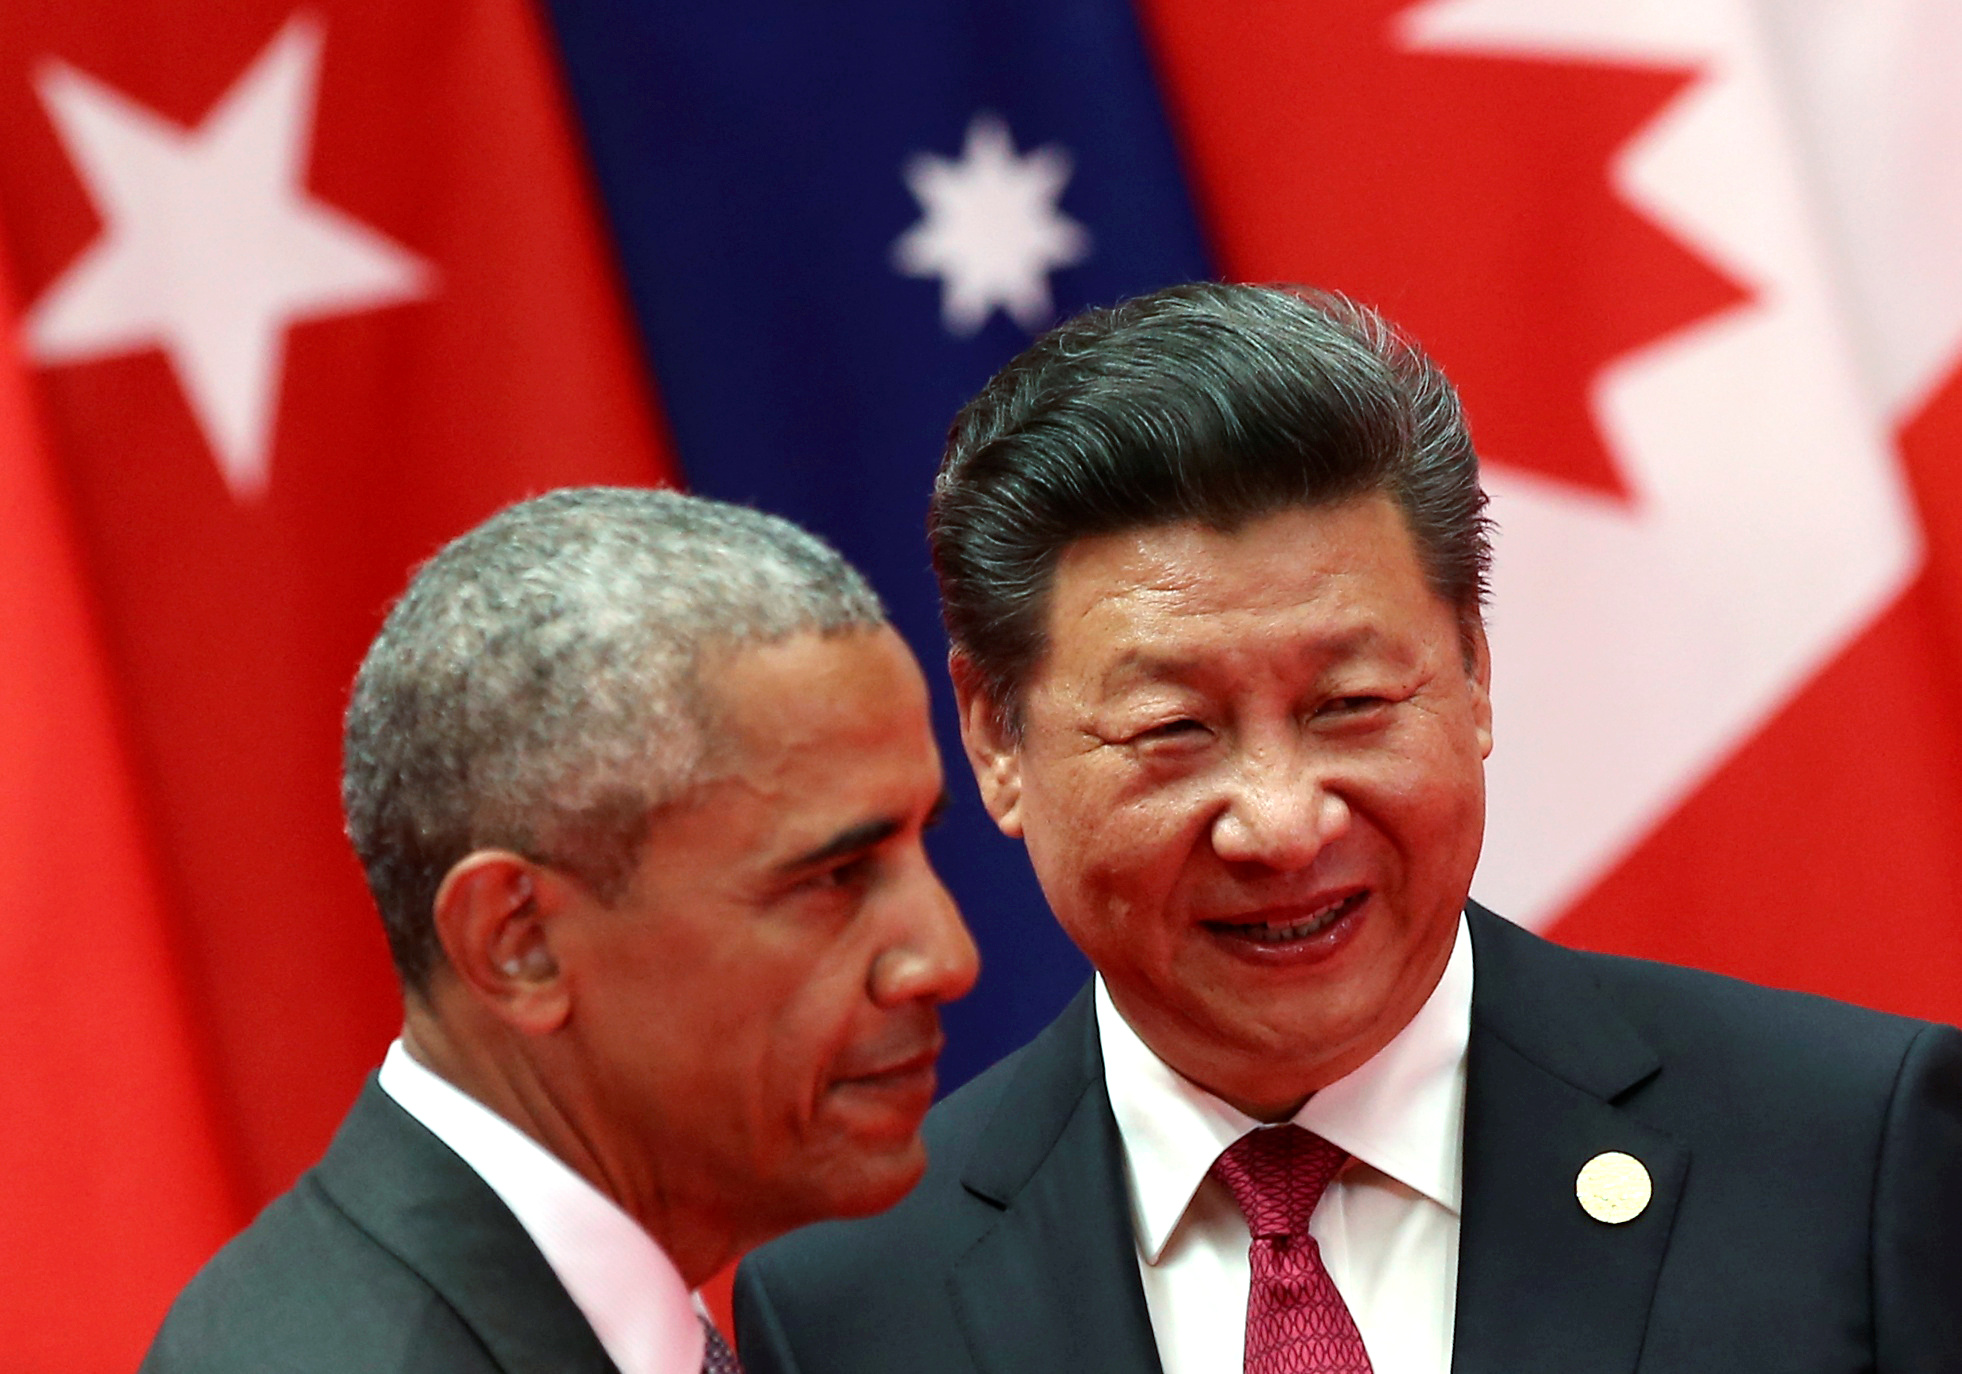 Chinese President Xi Jinping and U.S. President Barack Obama attend during the G20 Summit in Hangzhou